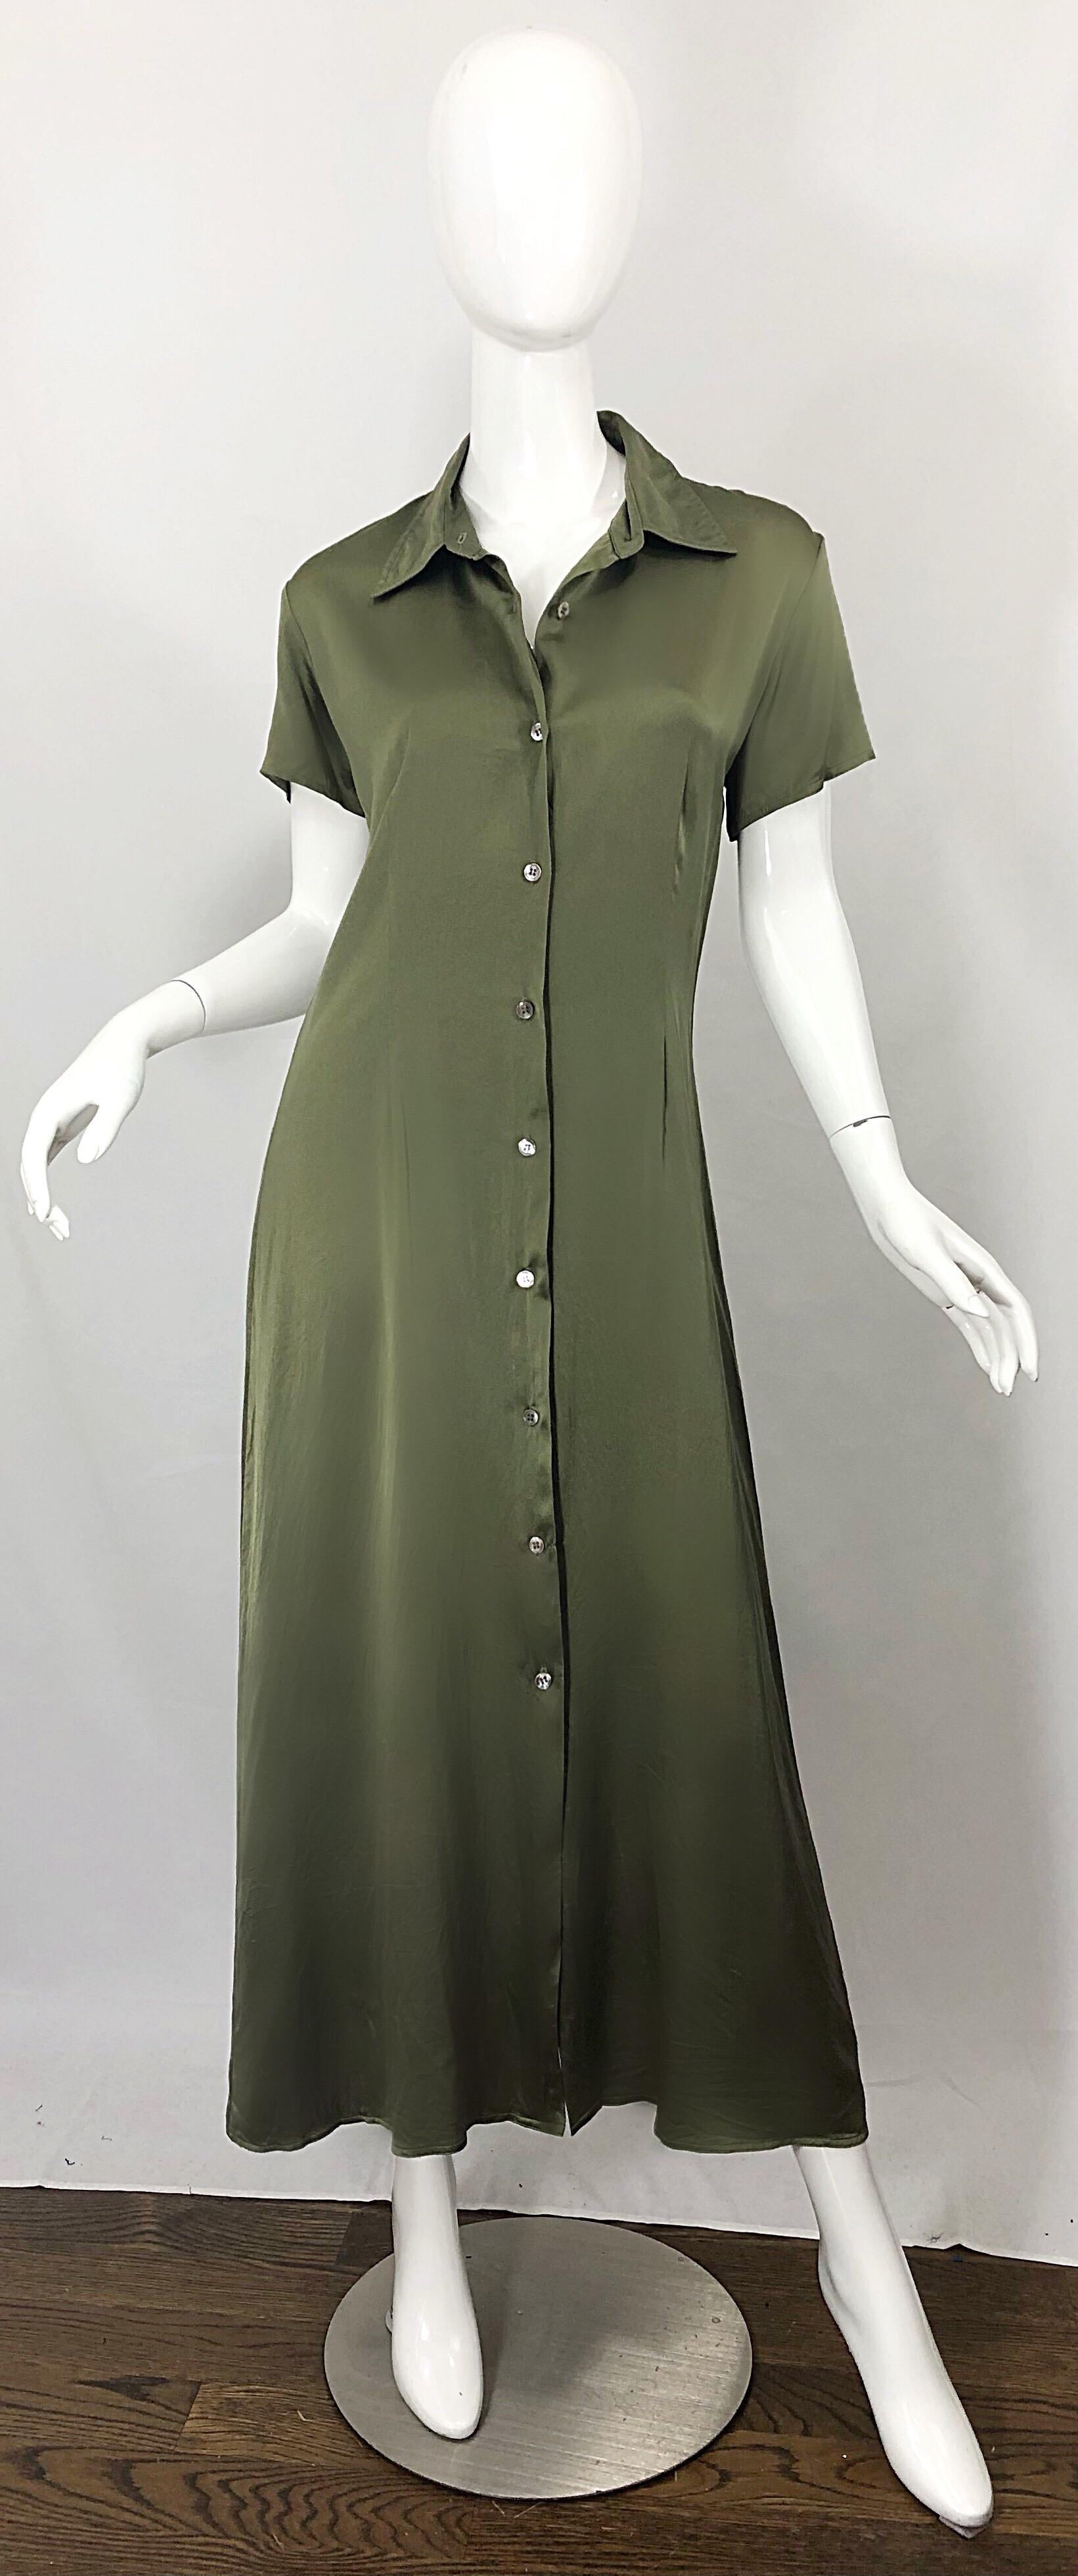 Effortlessly chic late 70s HALSTON olive green liquid silk maxi shirt dress! Features a tailored bodice with a forgiving flirty skirt Buttons up the front, and drapes the body beautifully. Can easily be dressed up or down, and is perfect for either